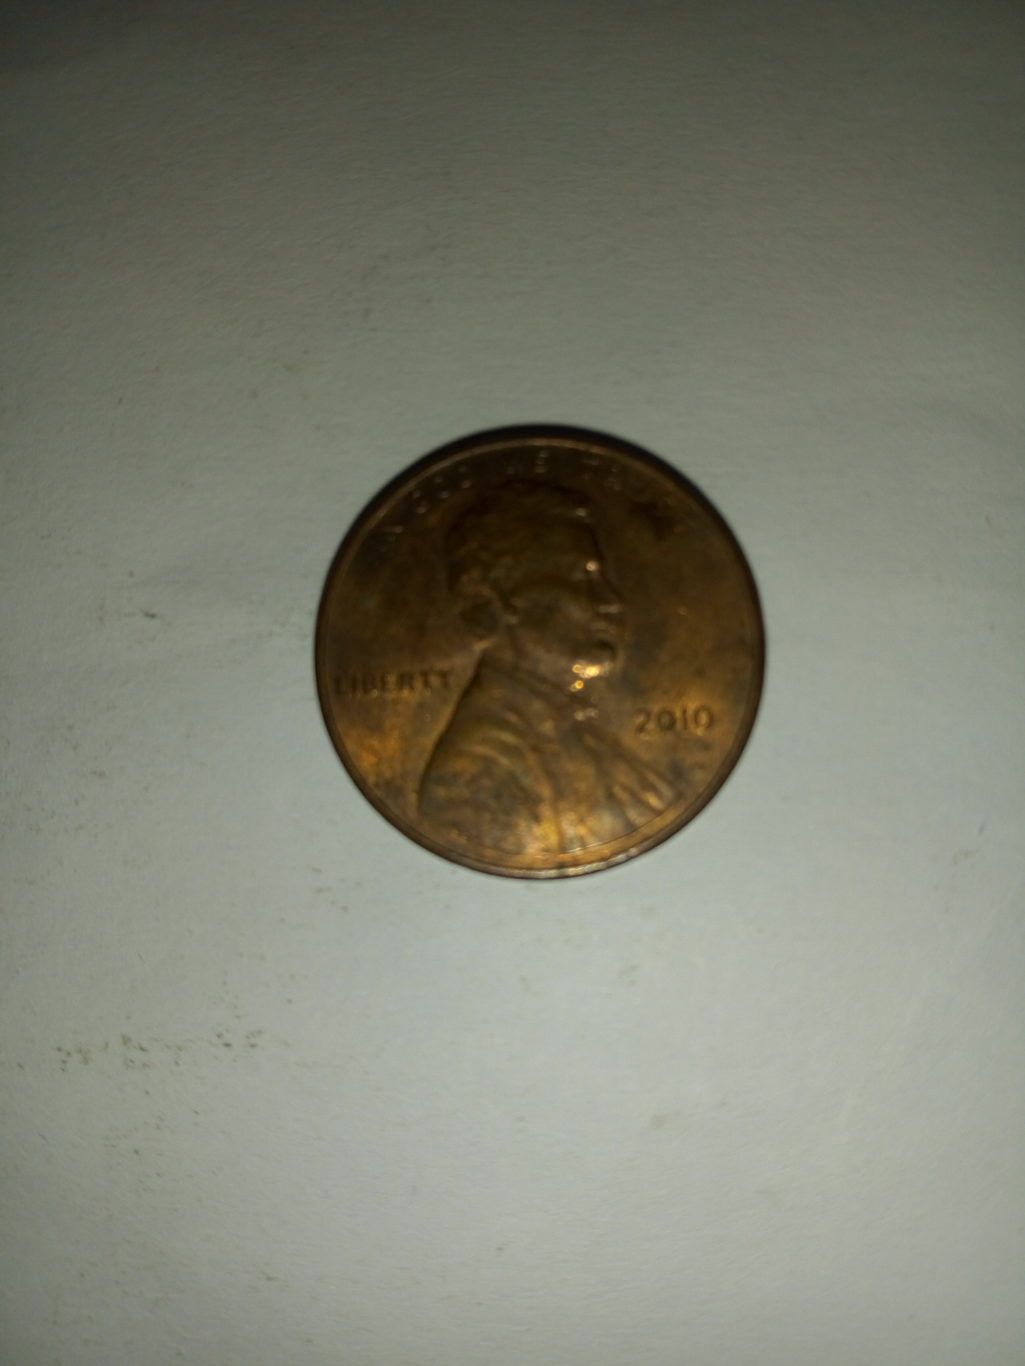 2010_united States of America 1 cent